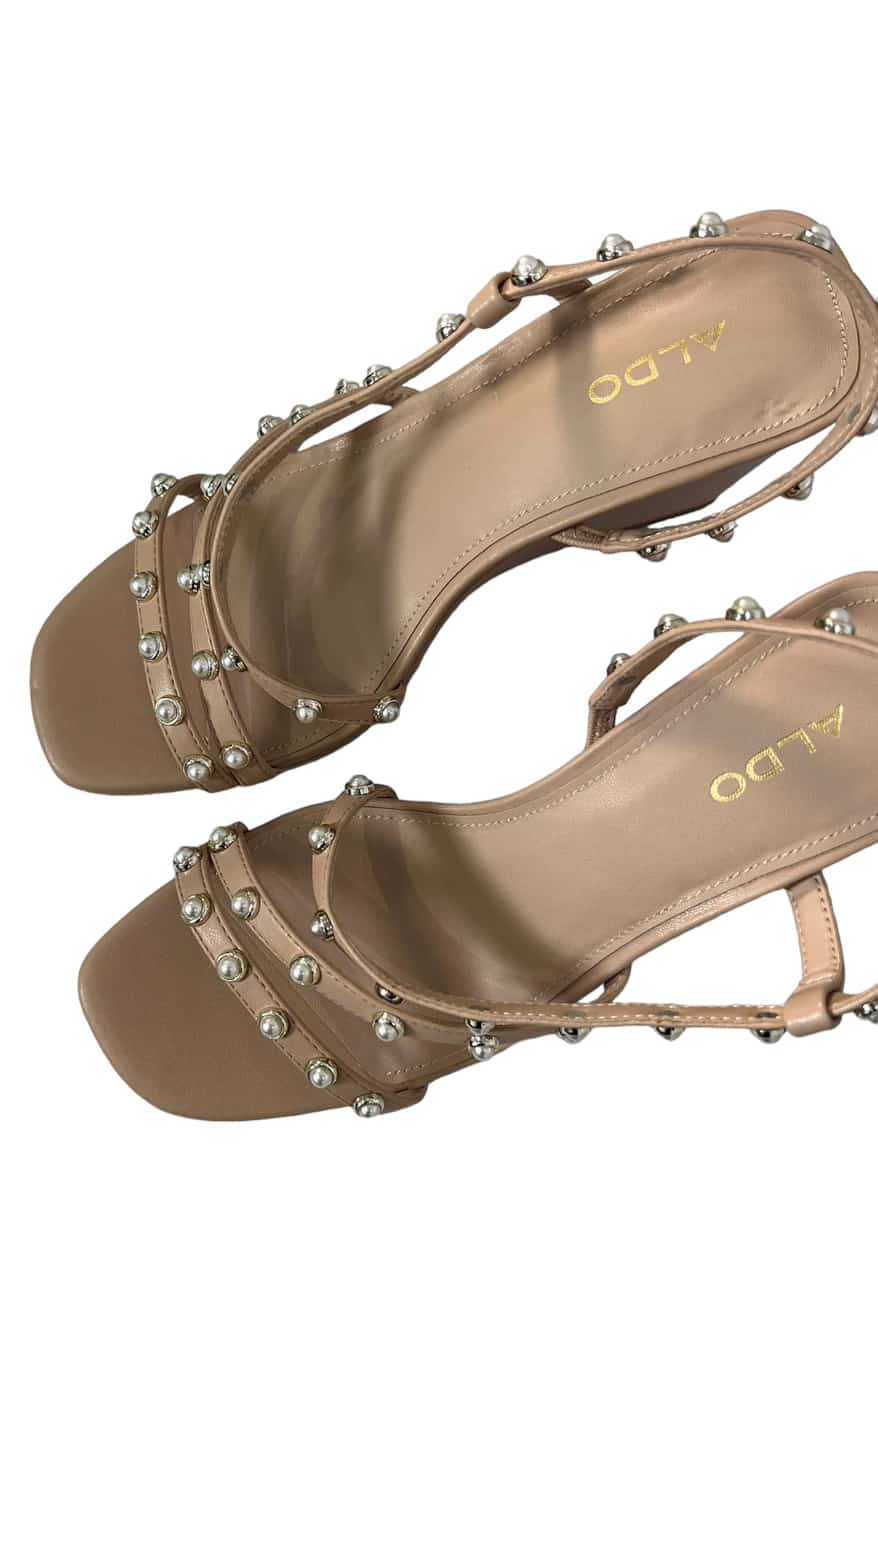 ALDO NUDE LEATHER PEARL STUDDED STRAP WEDGE SANDAL